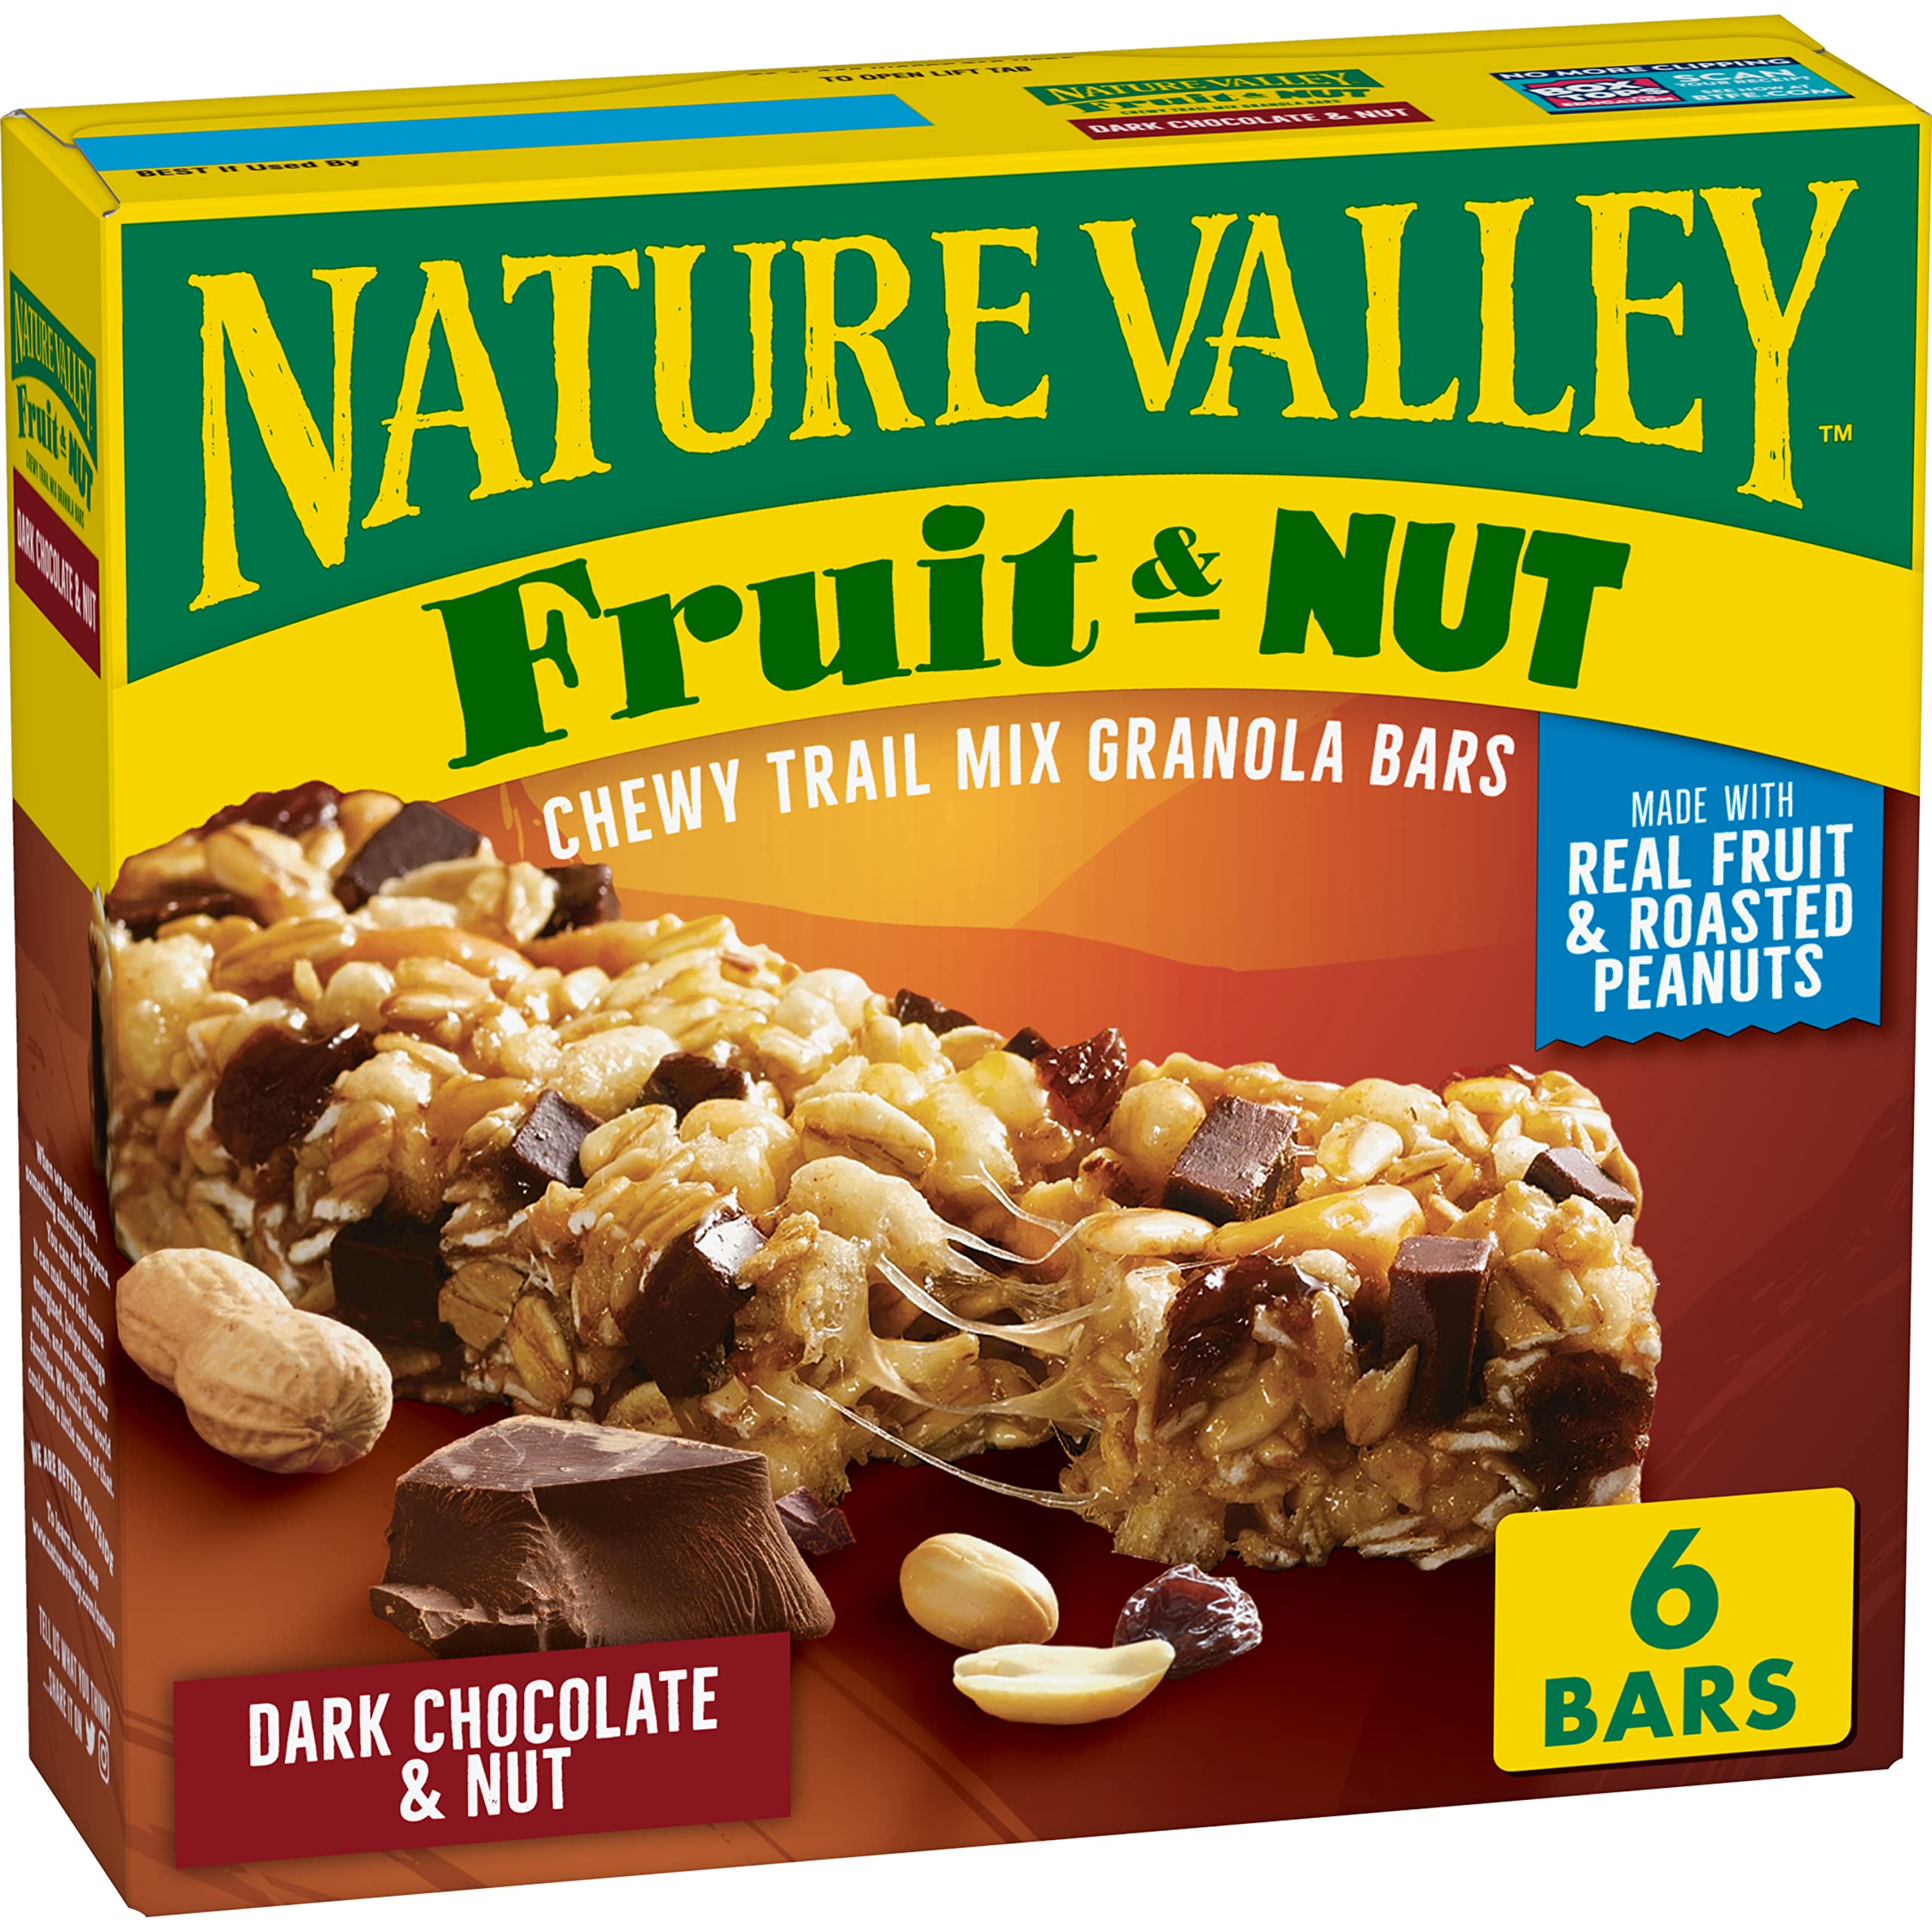 Nature Valley Granola Bars, Almond, Chewy 6 Ea